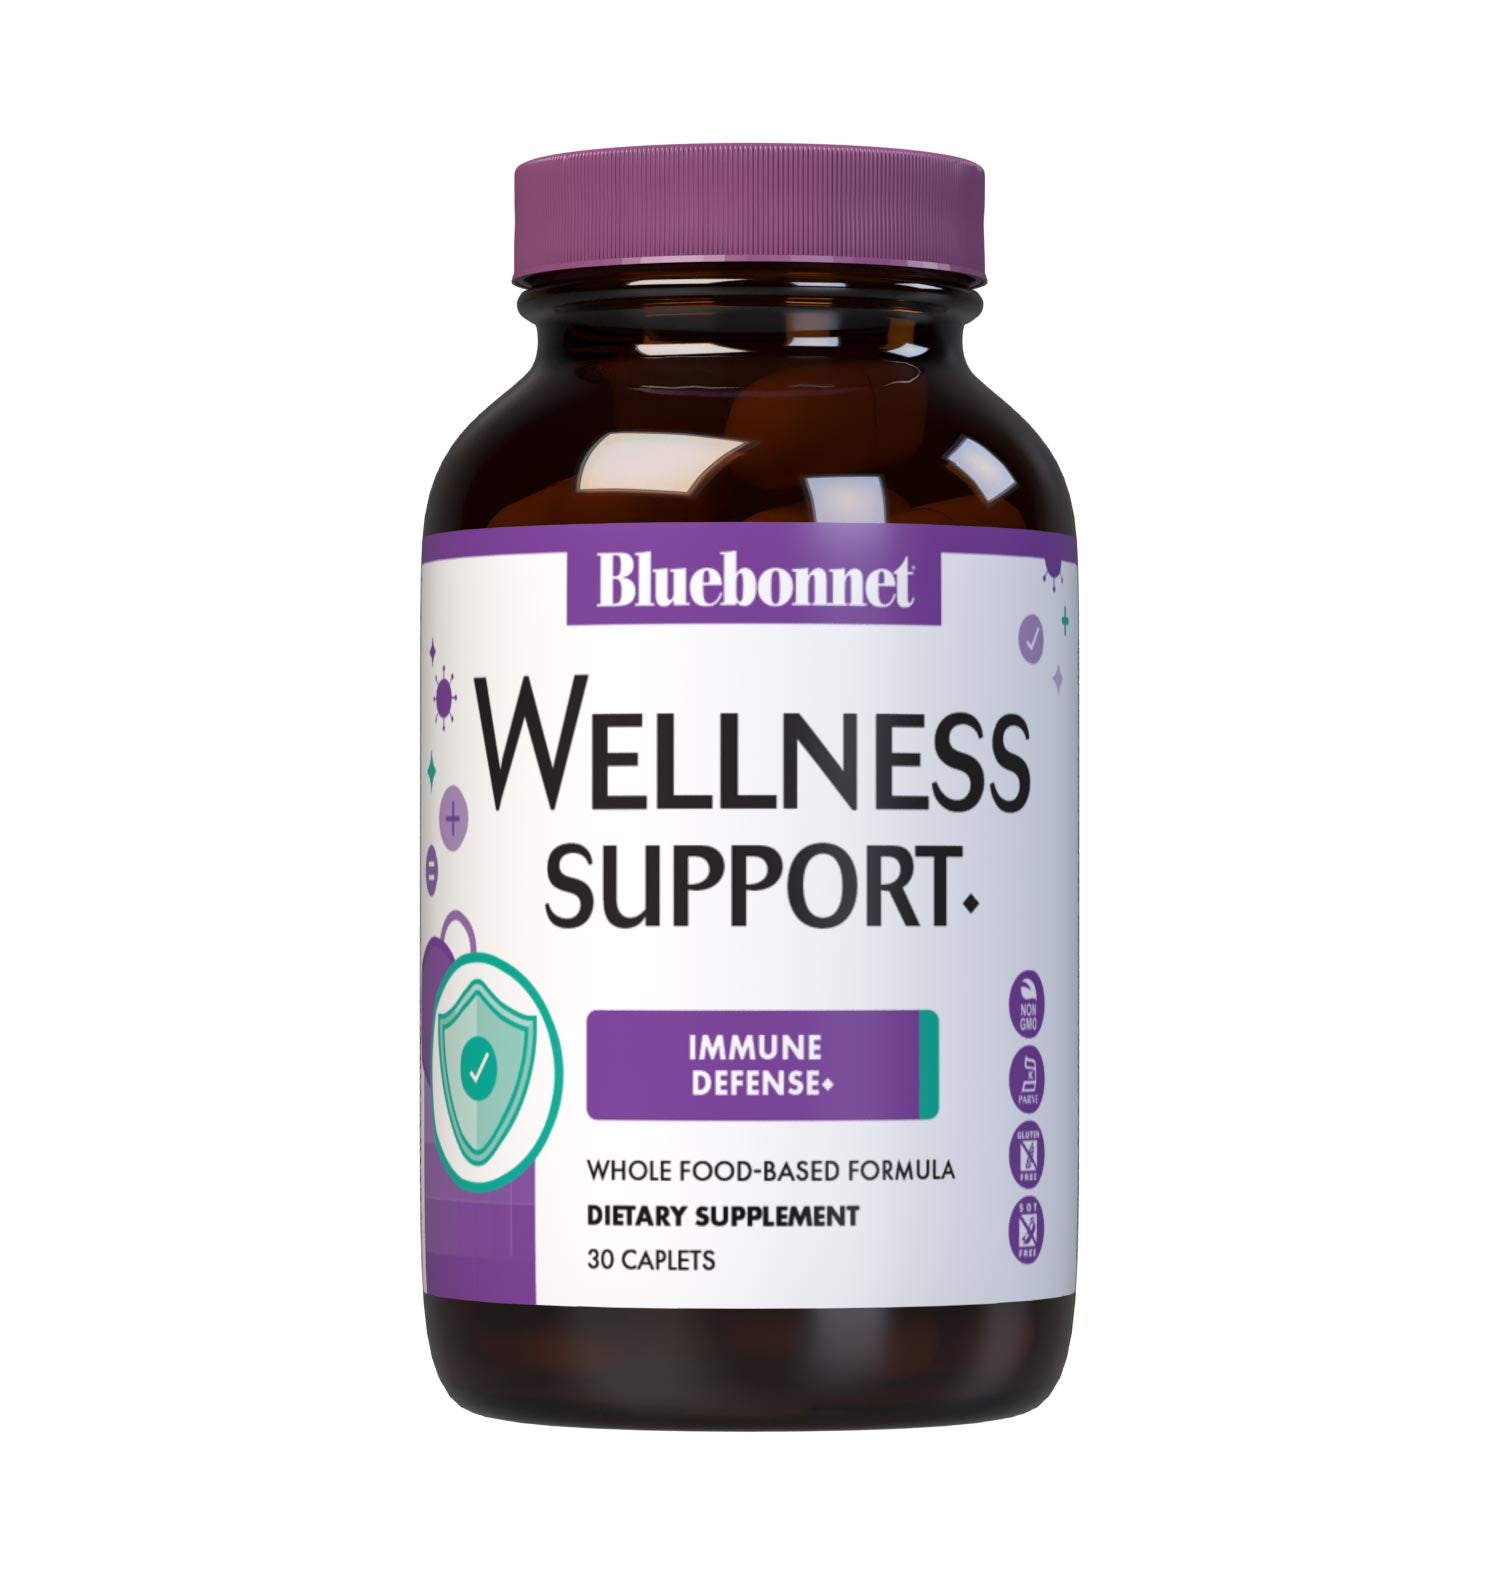 Bluebonnet’s Targeted Choice Wellness Support 30 Caplets are formulated with a complementary combination of non-GMO nutrients and sustainably sourced herbal extracts, such as vitamins A, C & D3, NAC, quercetin, zinc, andrographis, astragalus, elderberry, odor-less garlic, olive leaf, stinging nettle and turmeric. #size_30 count